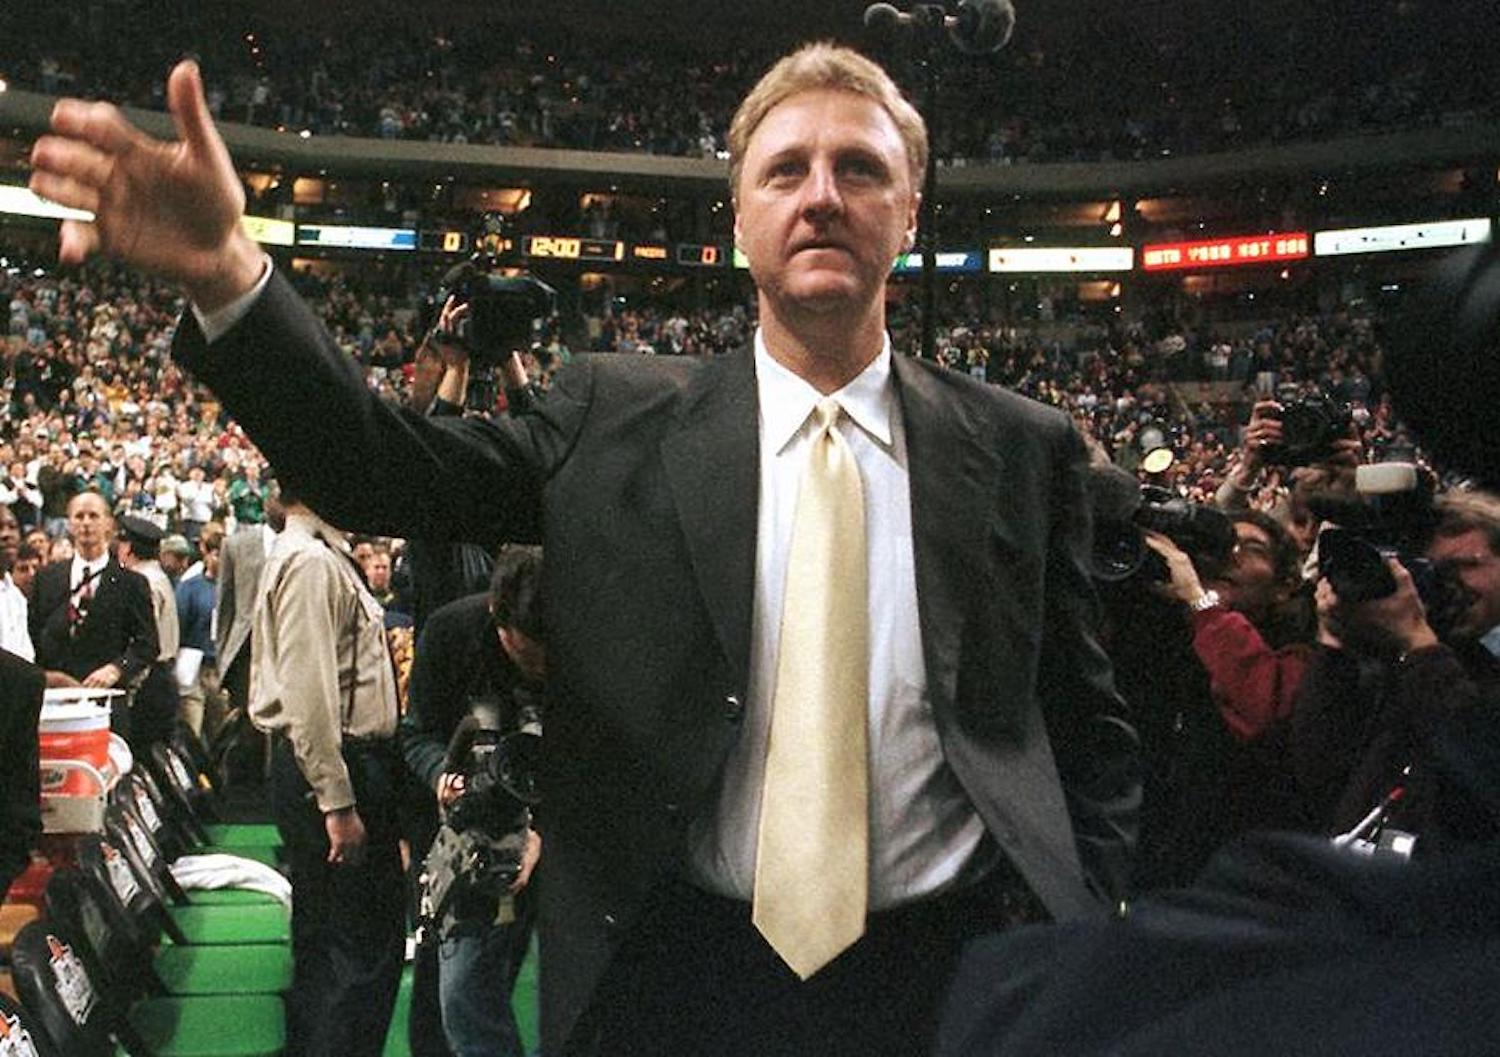 NBA legend Larry Bird acknowledges the crowd during his return to Boston with the Indiana Pacers